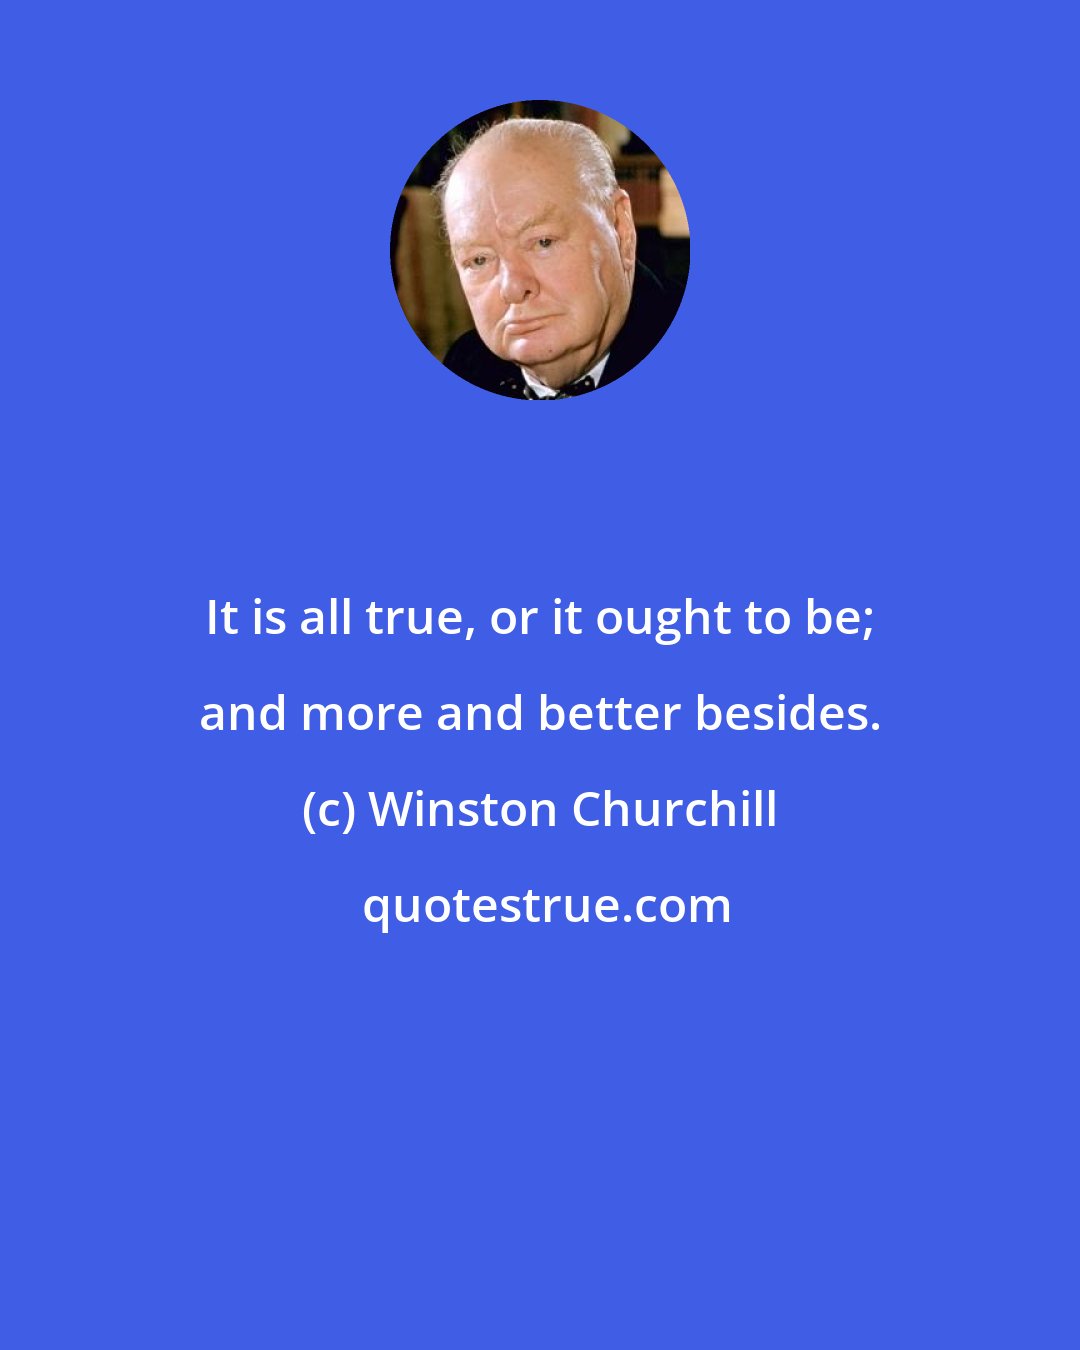 Winston Churchill: It is all true, or it ought to be; and more and better besides.